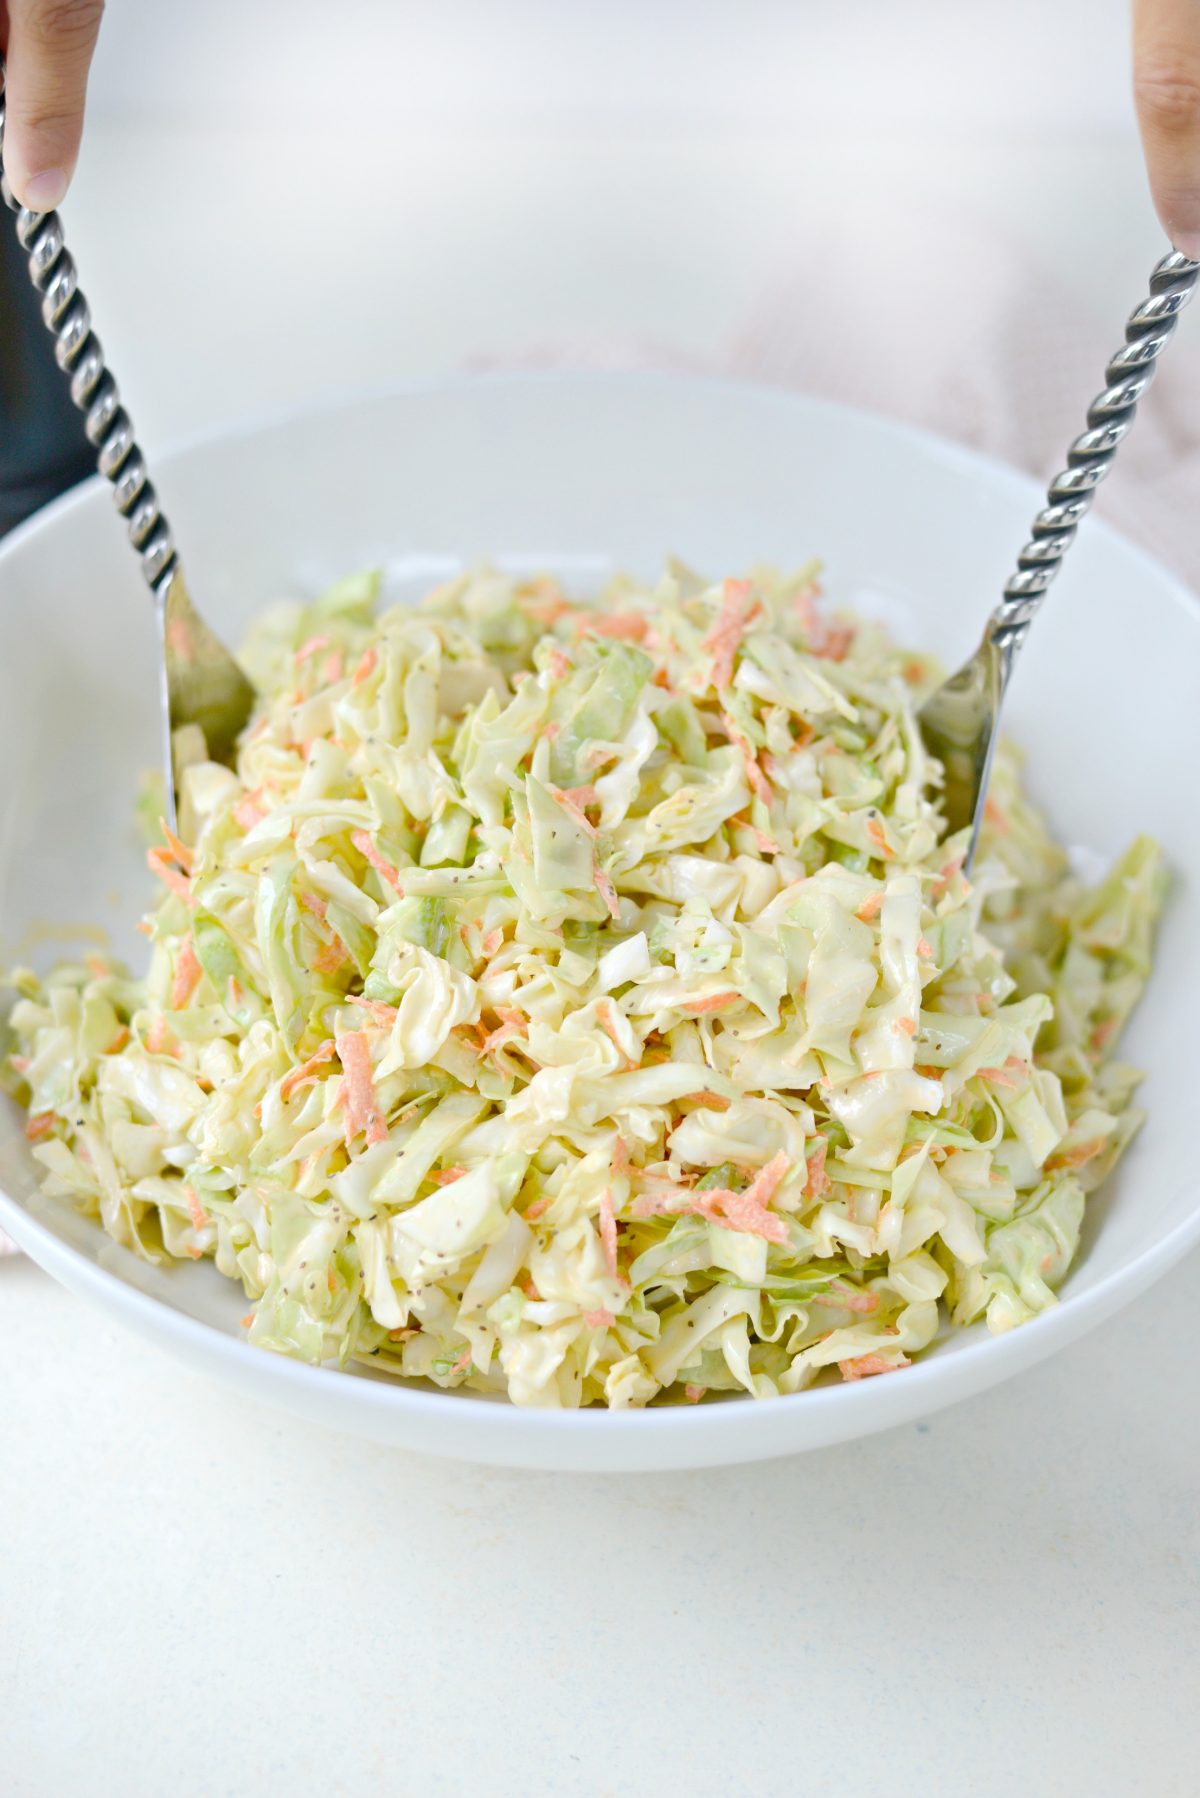 Classic Coleslaw Recipe with Homemade Dressing l SimplyScratch.com